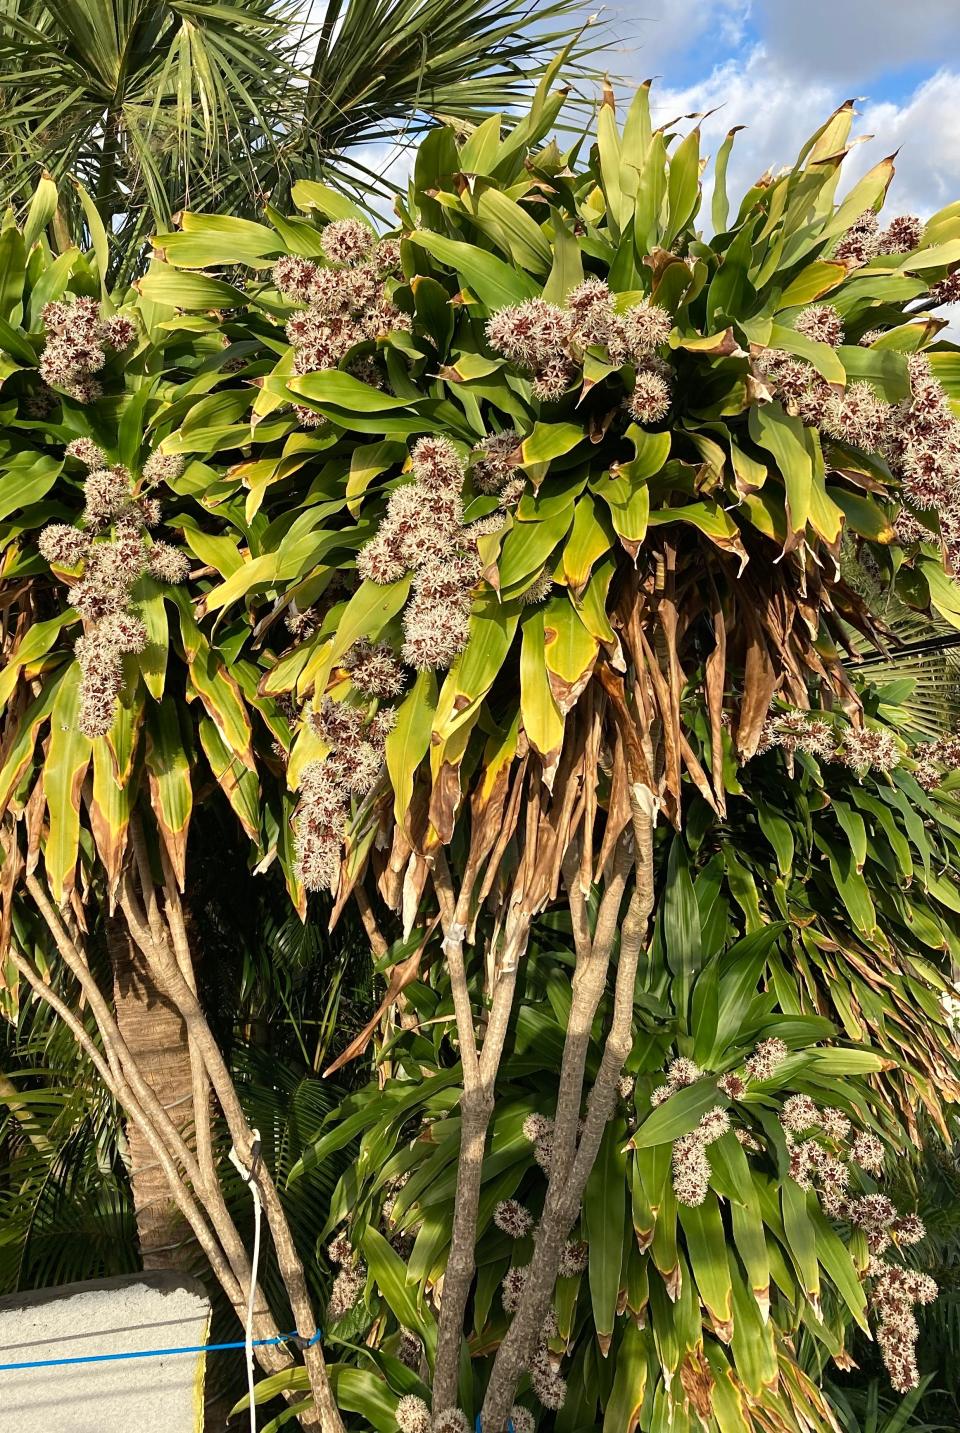 The dracaena fragrans, or corn plant, often flowers in fall and winter following a temperature drop of a couple weeks.